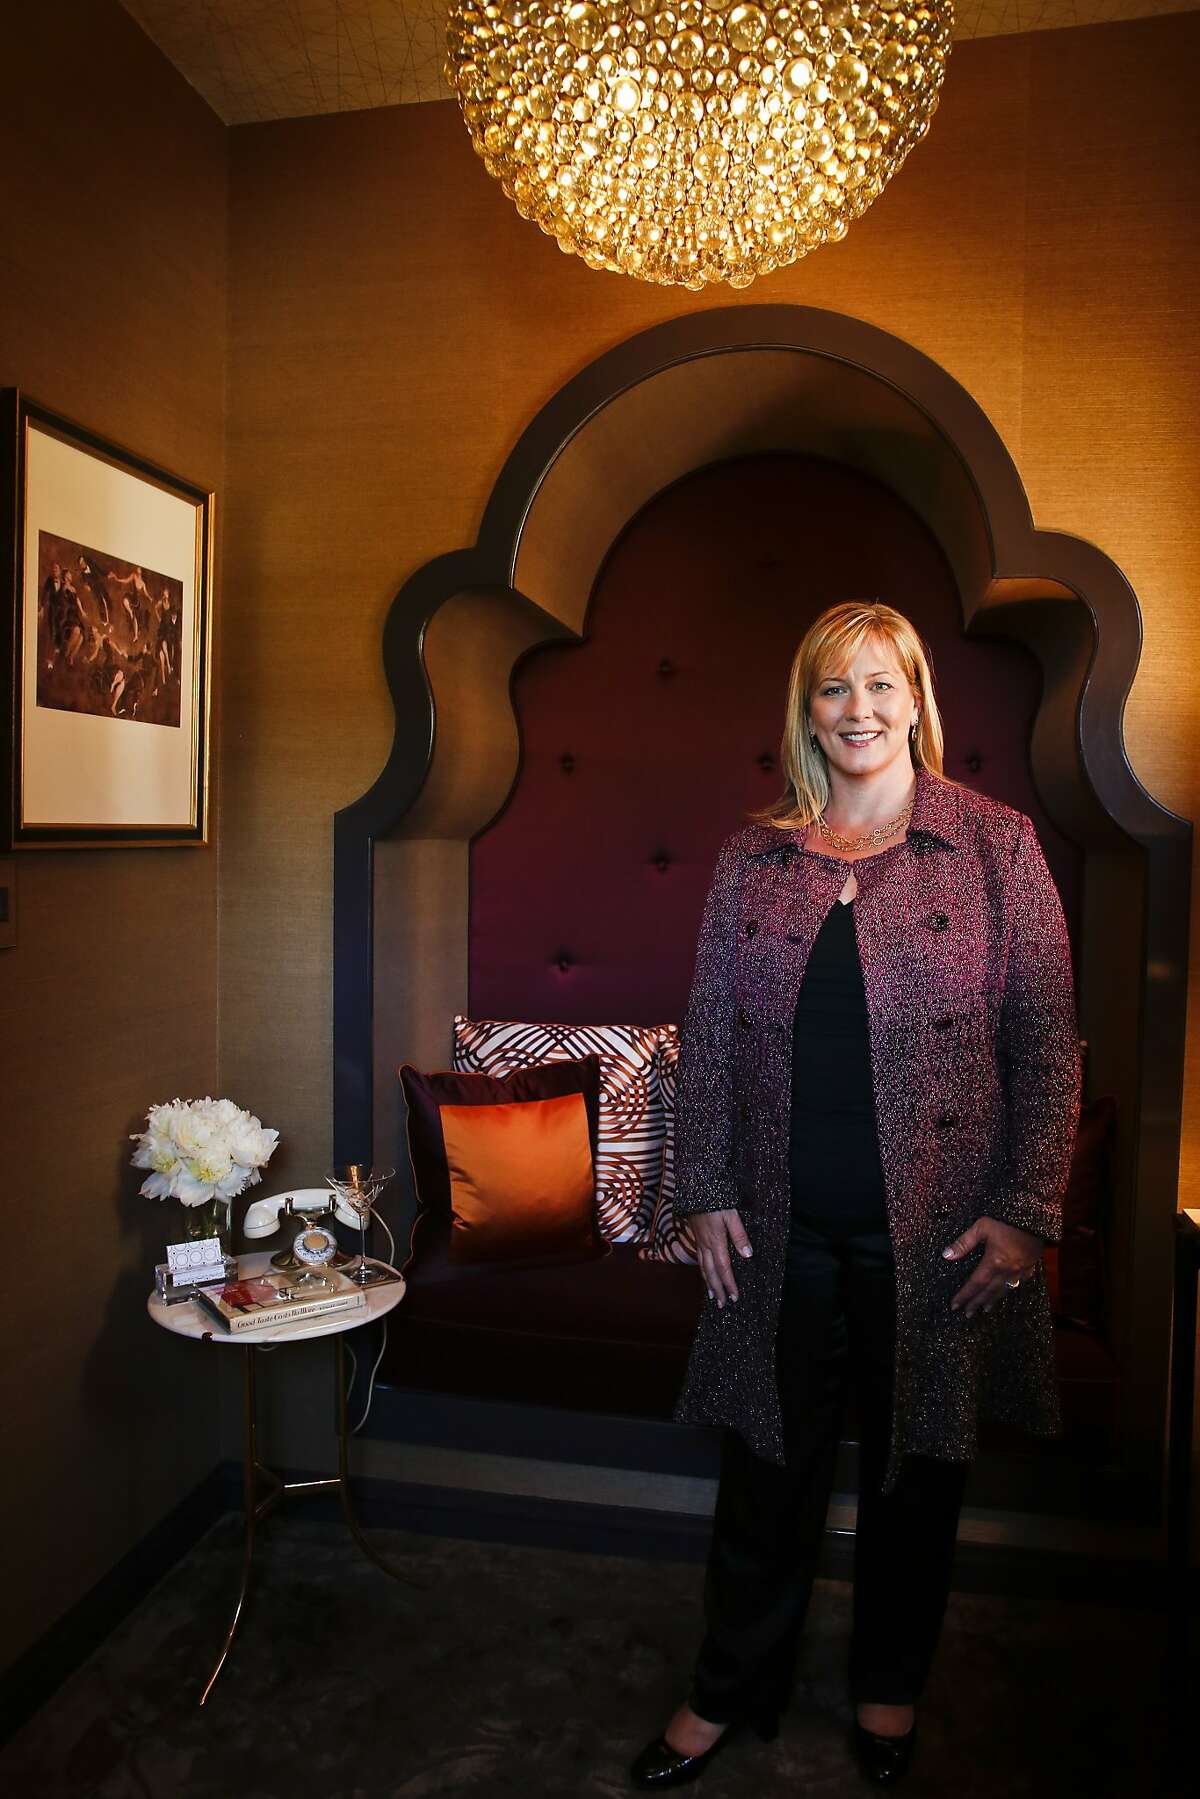 Kristi Will of Kristi Will Home + Design stands in The Powder Room and Lounge on Monday, April 28, 2014 which she designed for the San Francisco Decorator Showcase in San Francisco, Calif.